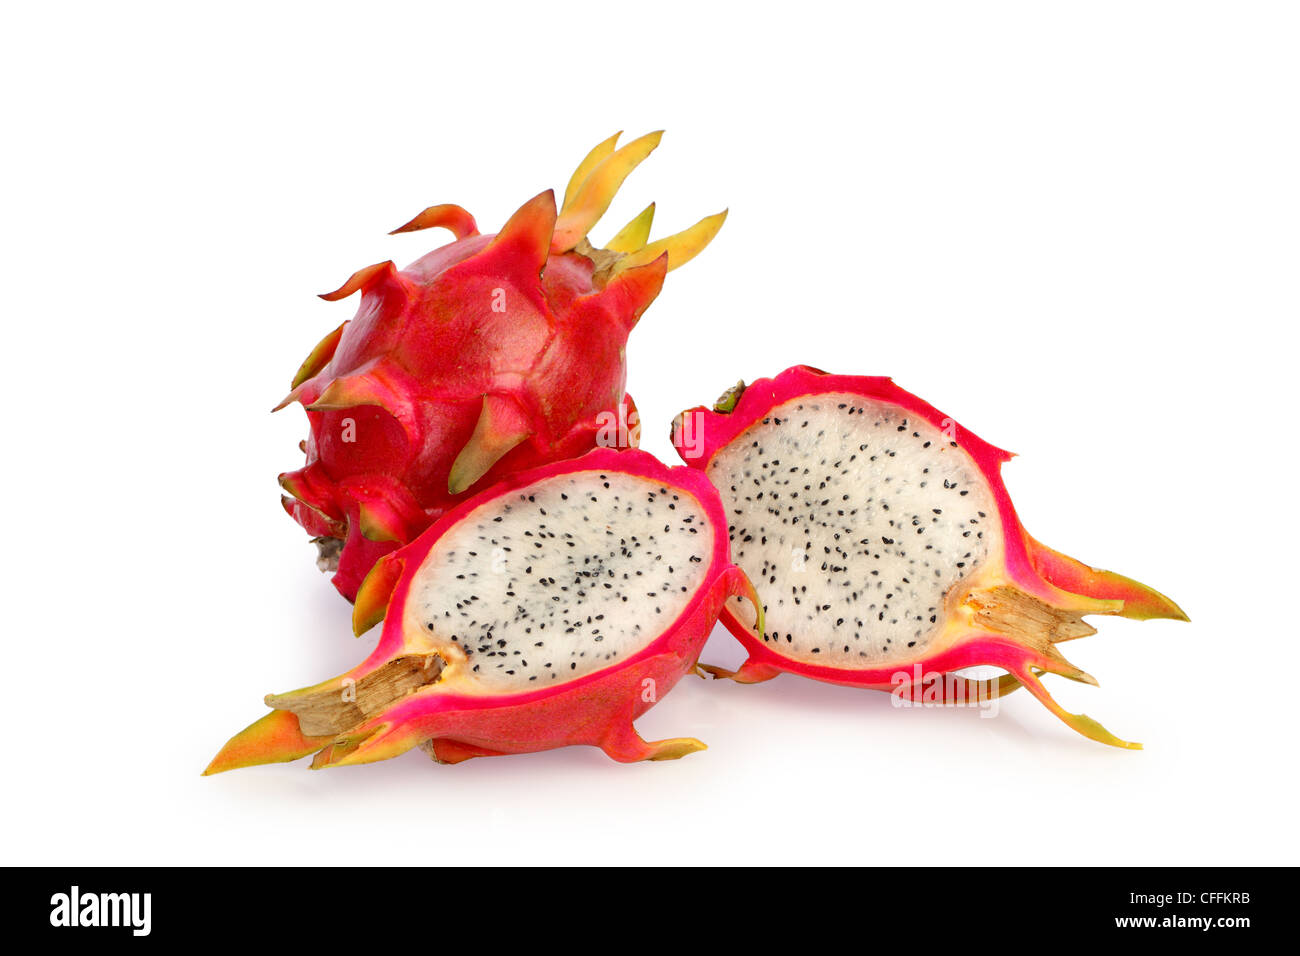 Whole and sliced Dragonfruit cut out on white background Stock Photo